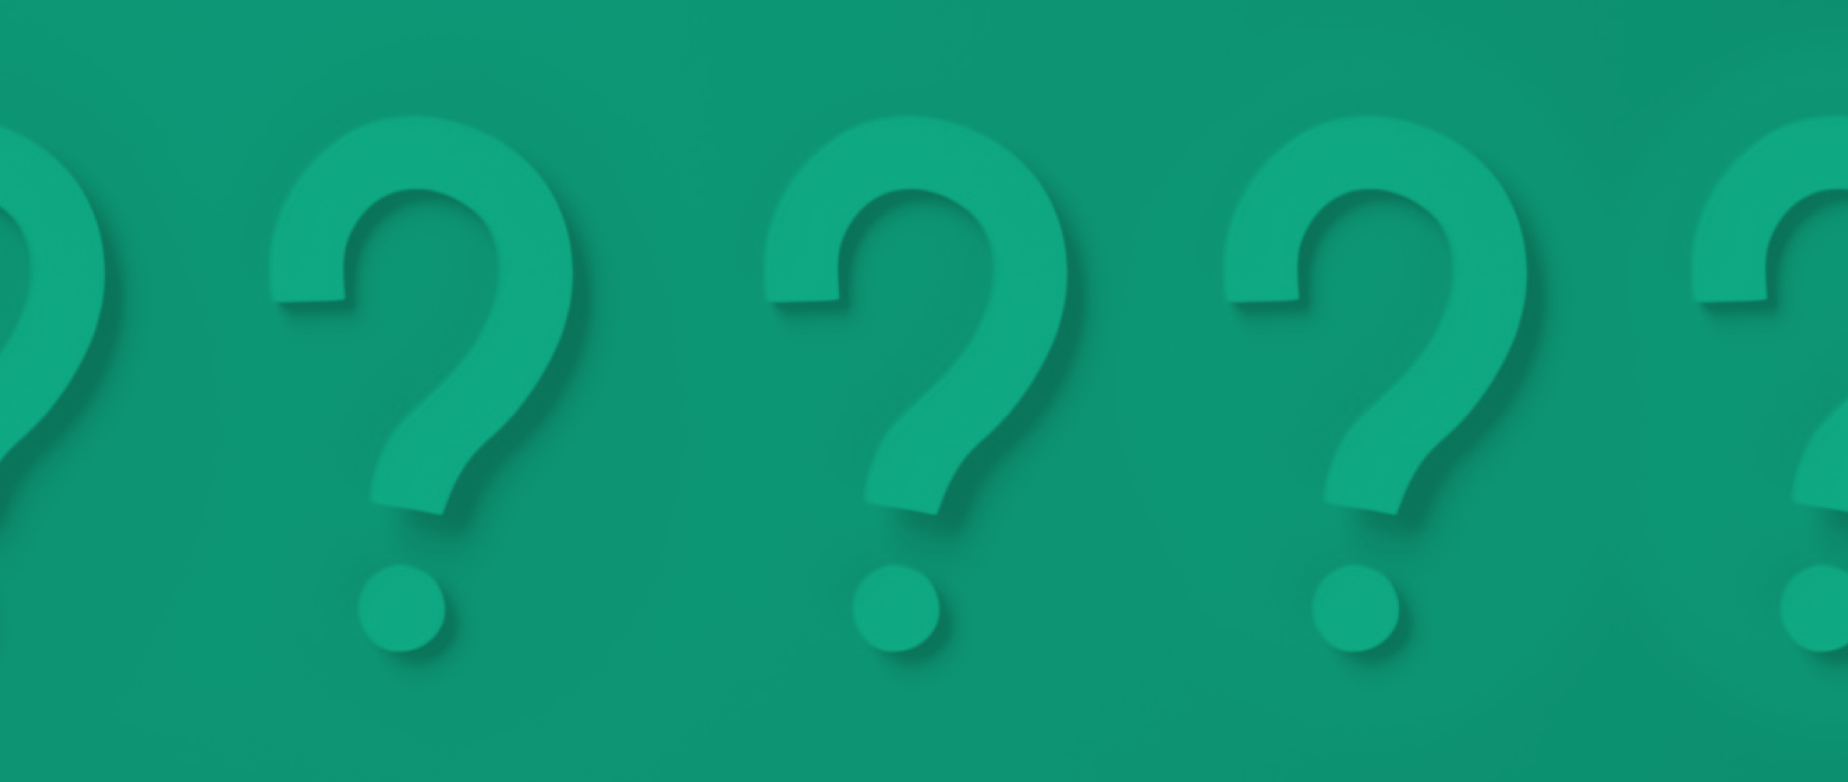 a green background with repeating question marks across it: what is source code